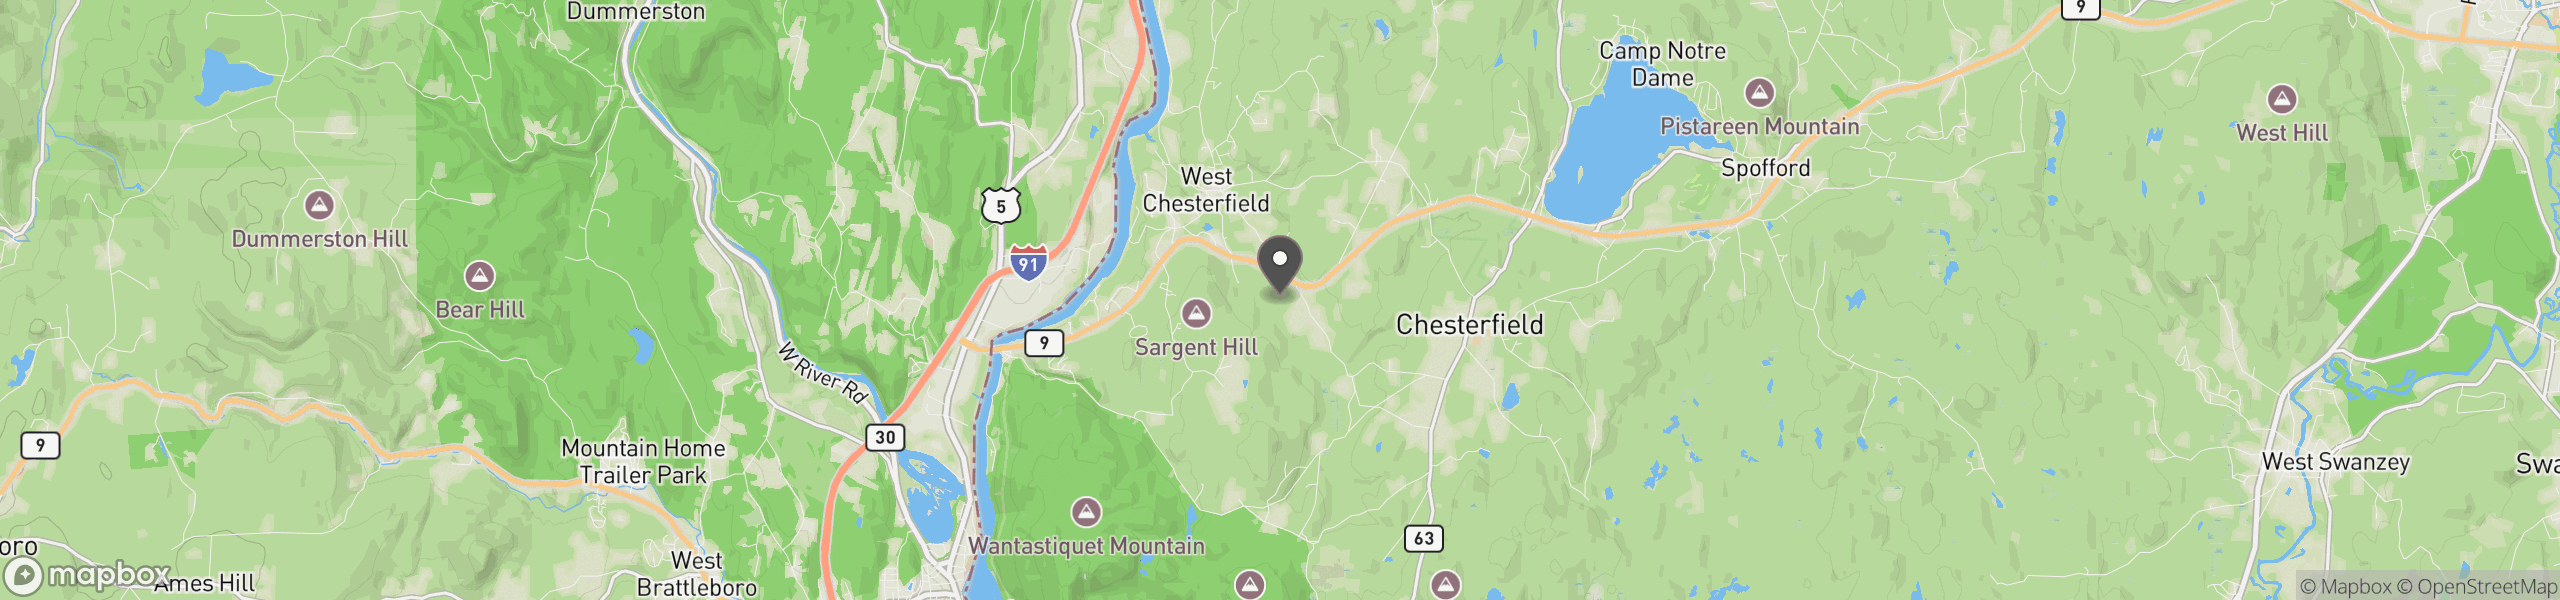 West Chesterfield, NH